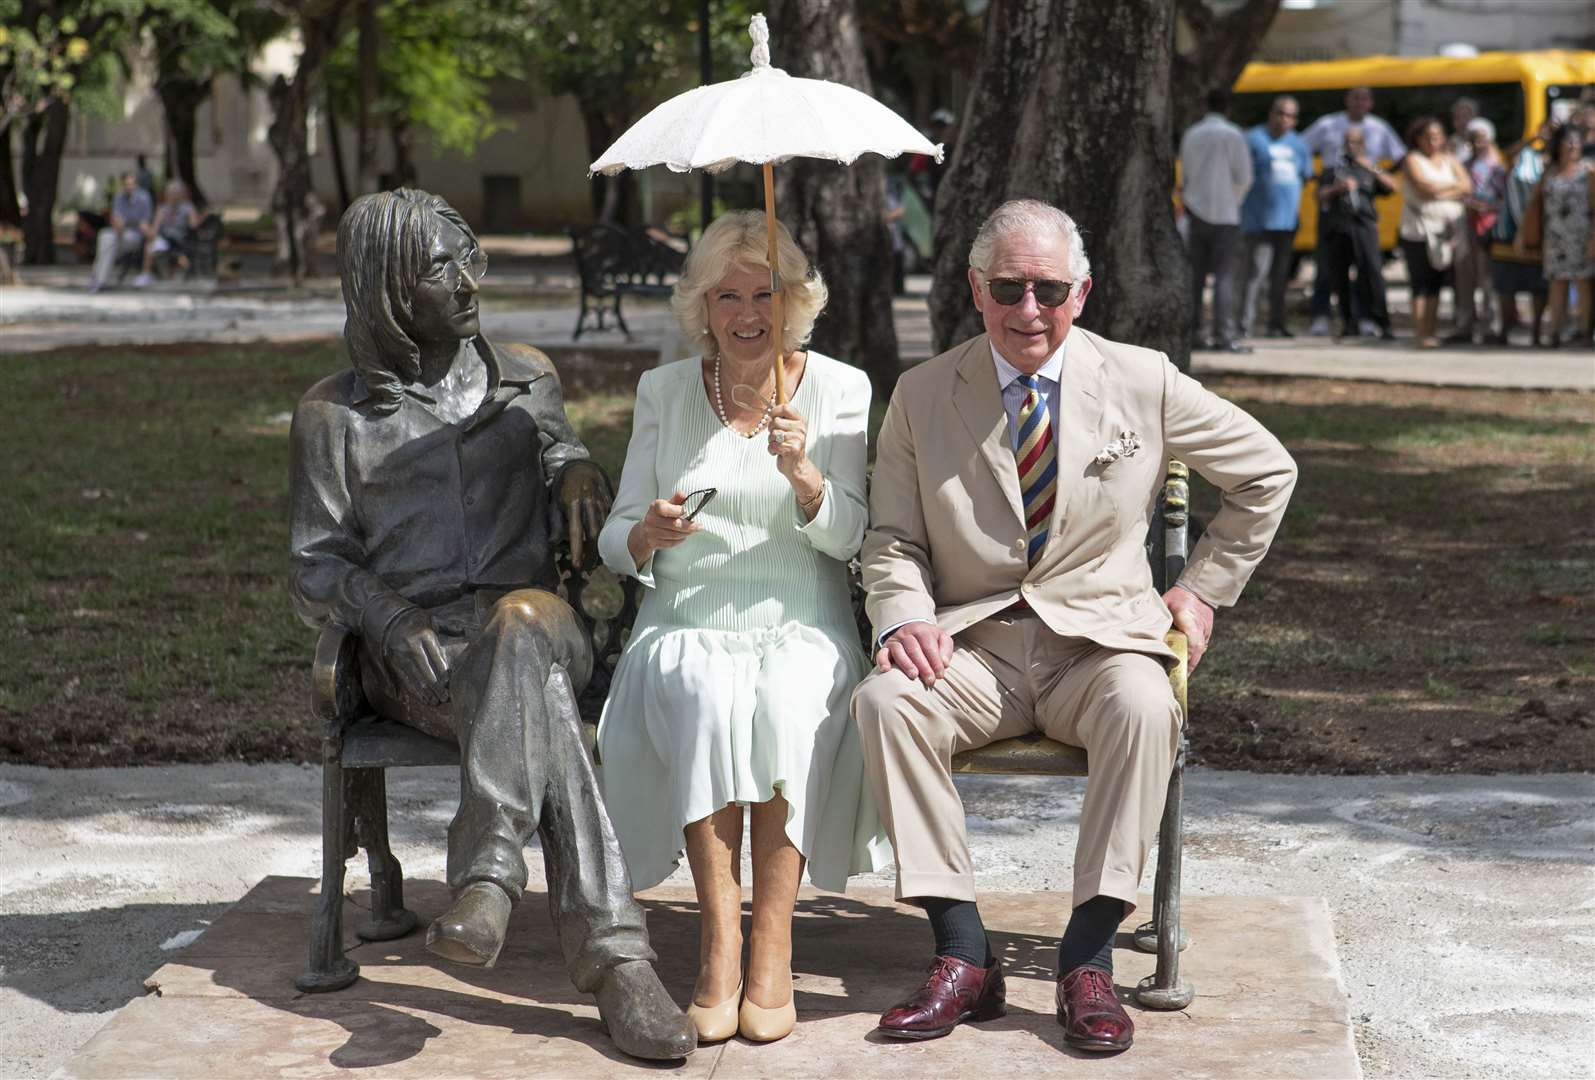 Charles and the then-Duchess of Cornwall sitting on the John Lennon memorial bench in Havana, Cuba (Jane Barlow/PA)